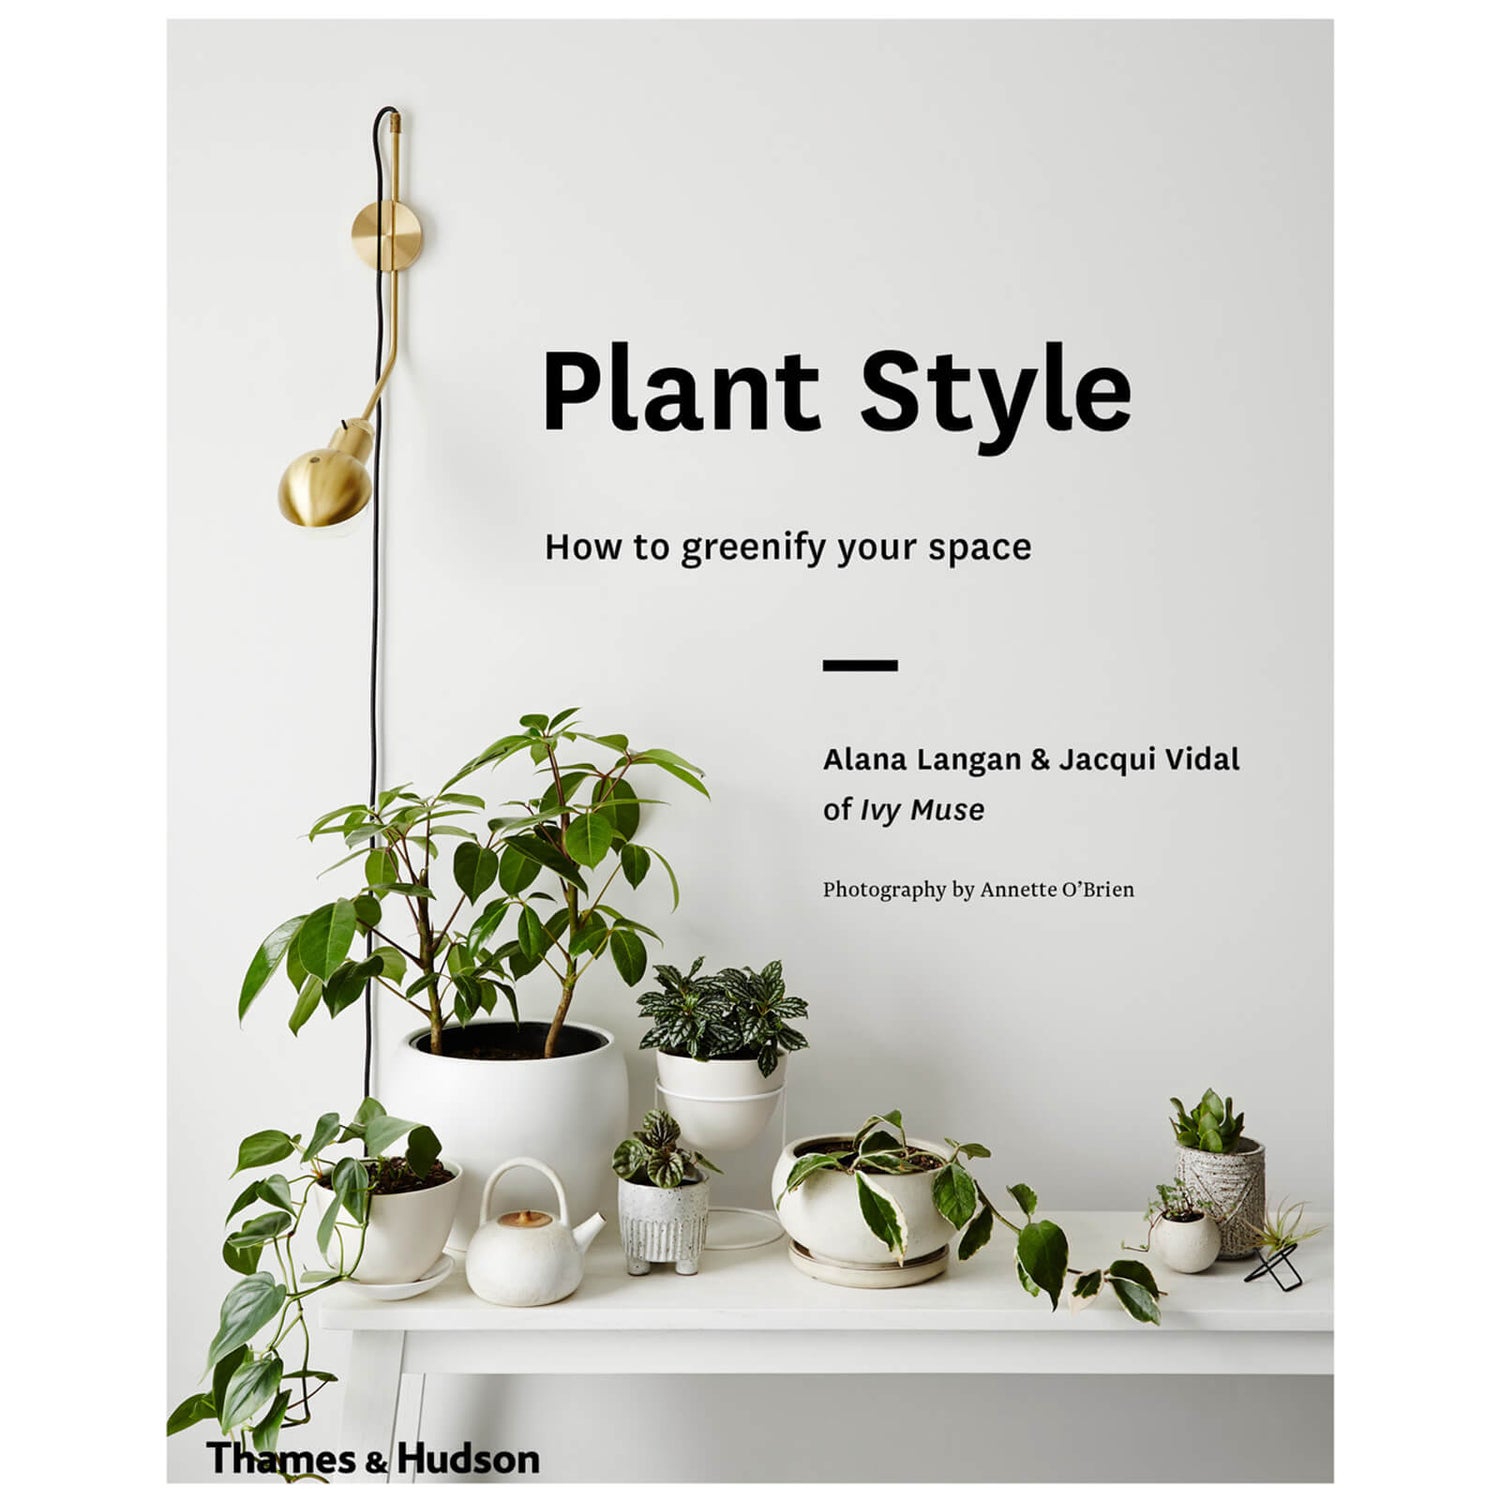 Thames and Hudson Ltd Australia: Plant Style - How to Greenify Your Space